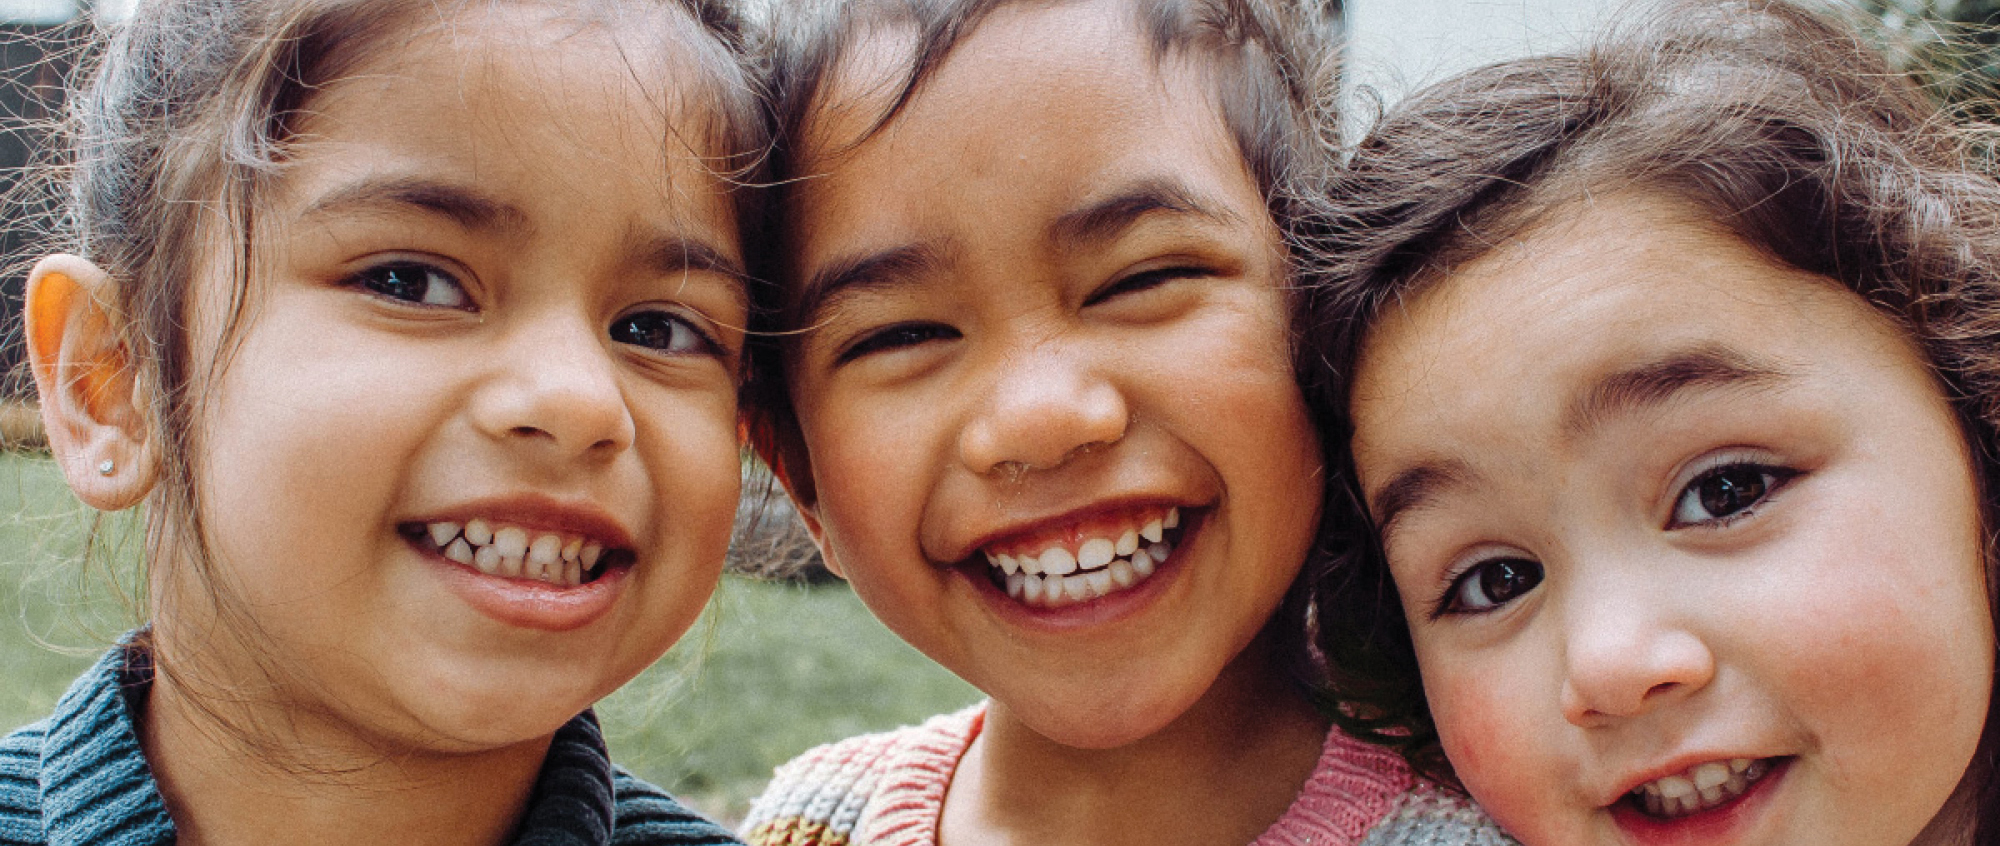 Three kids smiling with heads together.